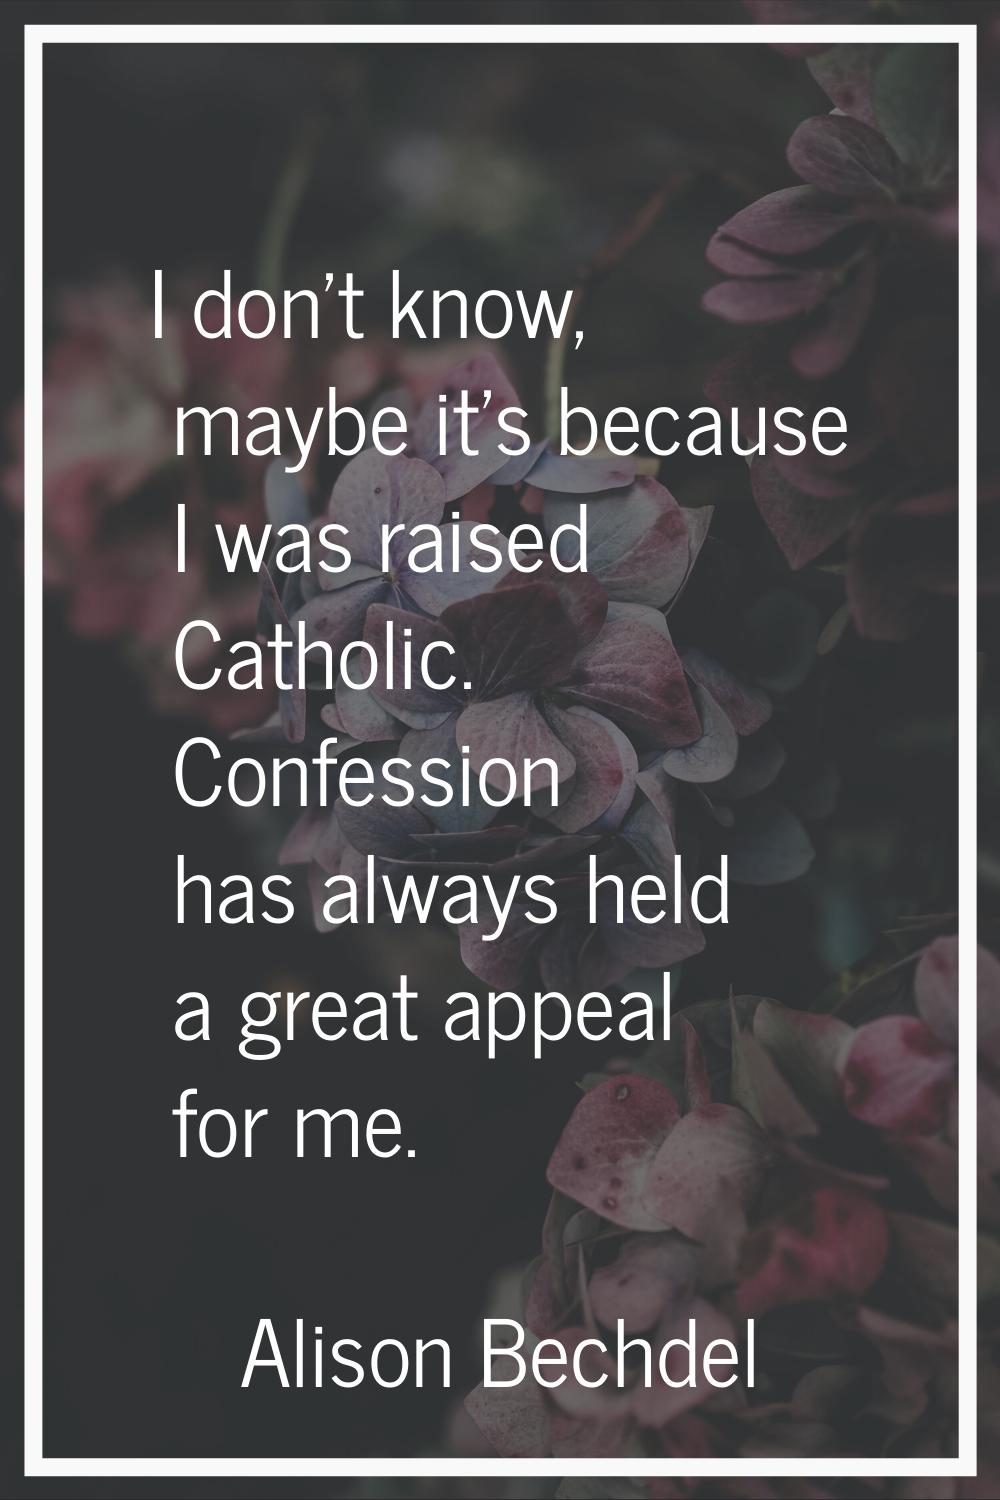 I don't know, maybe it's because I was raised Catholic. Confession has always held a great appeal f